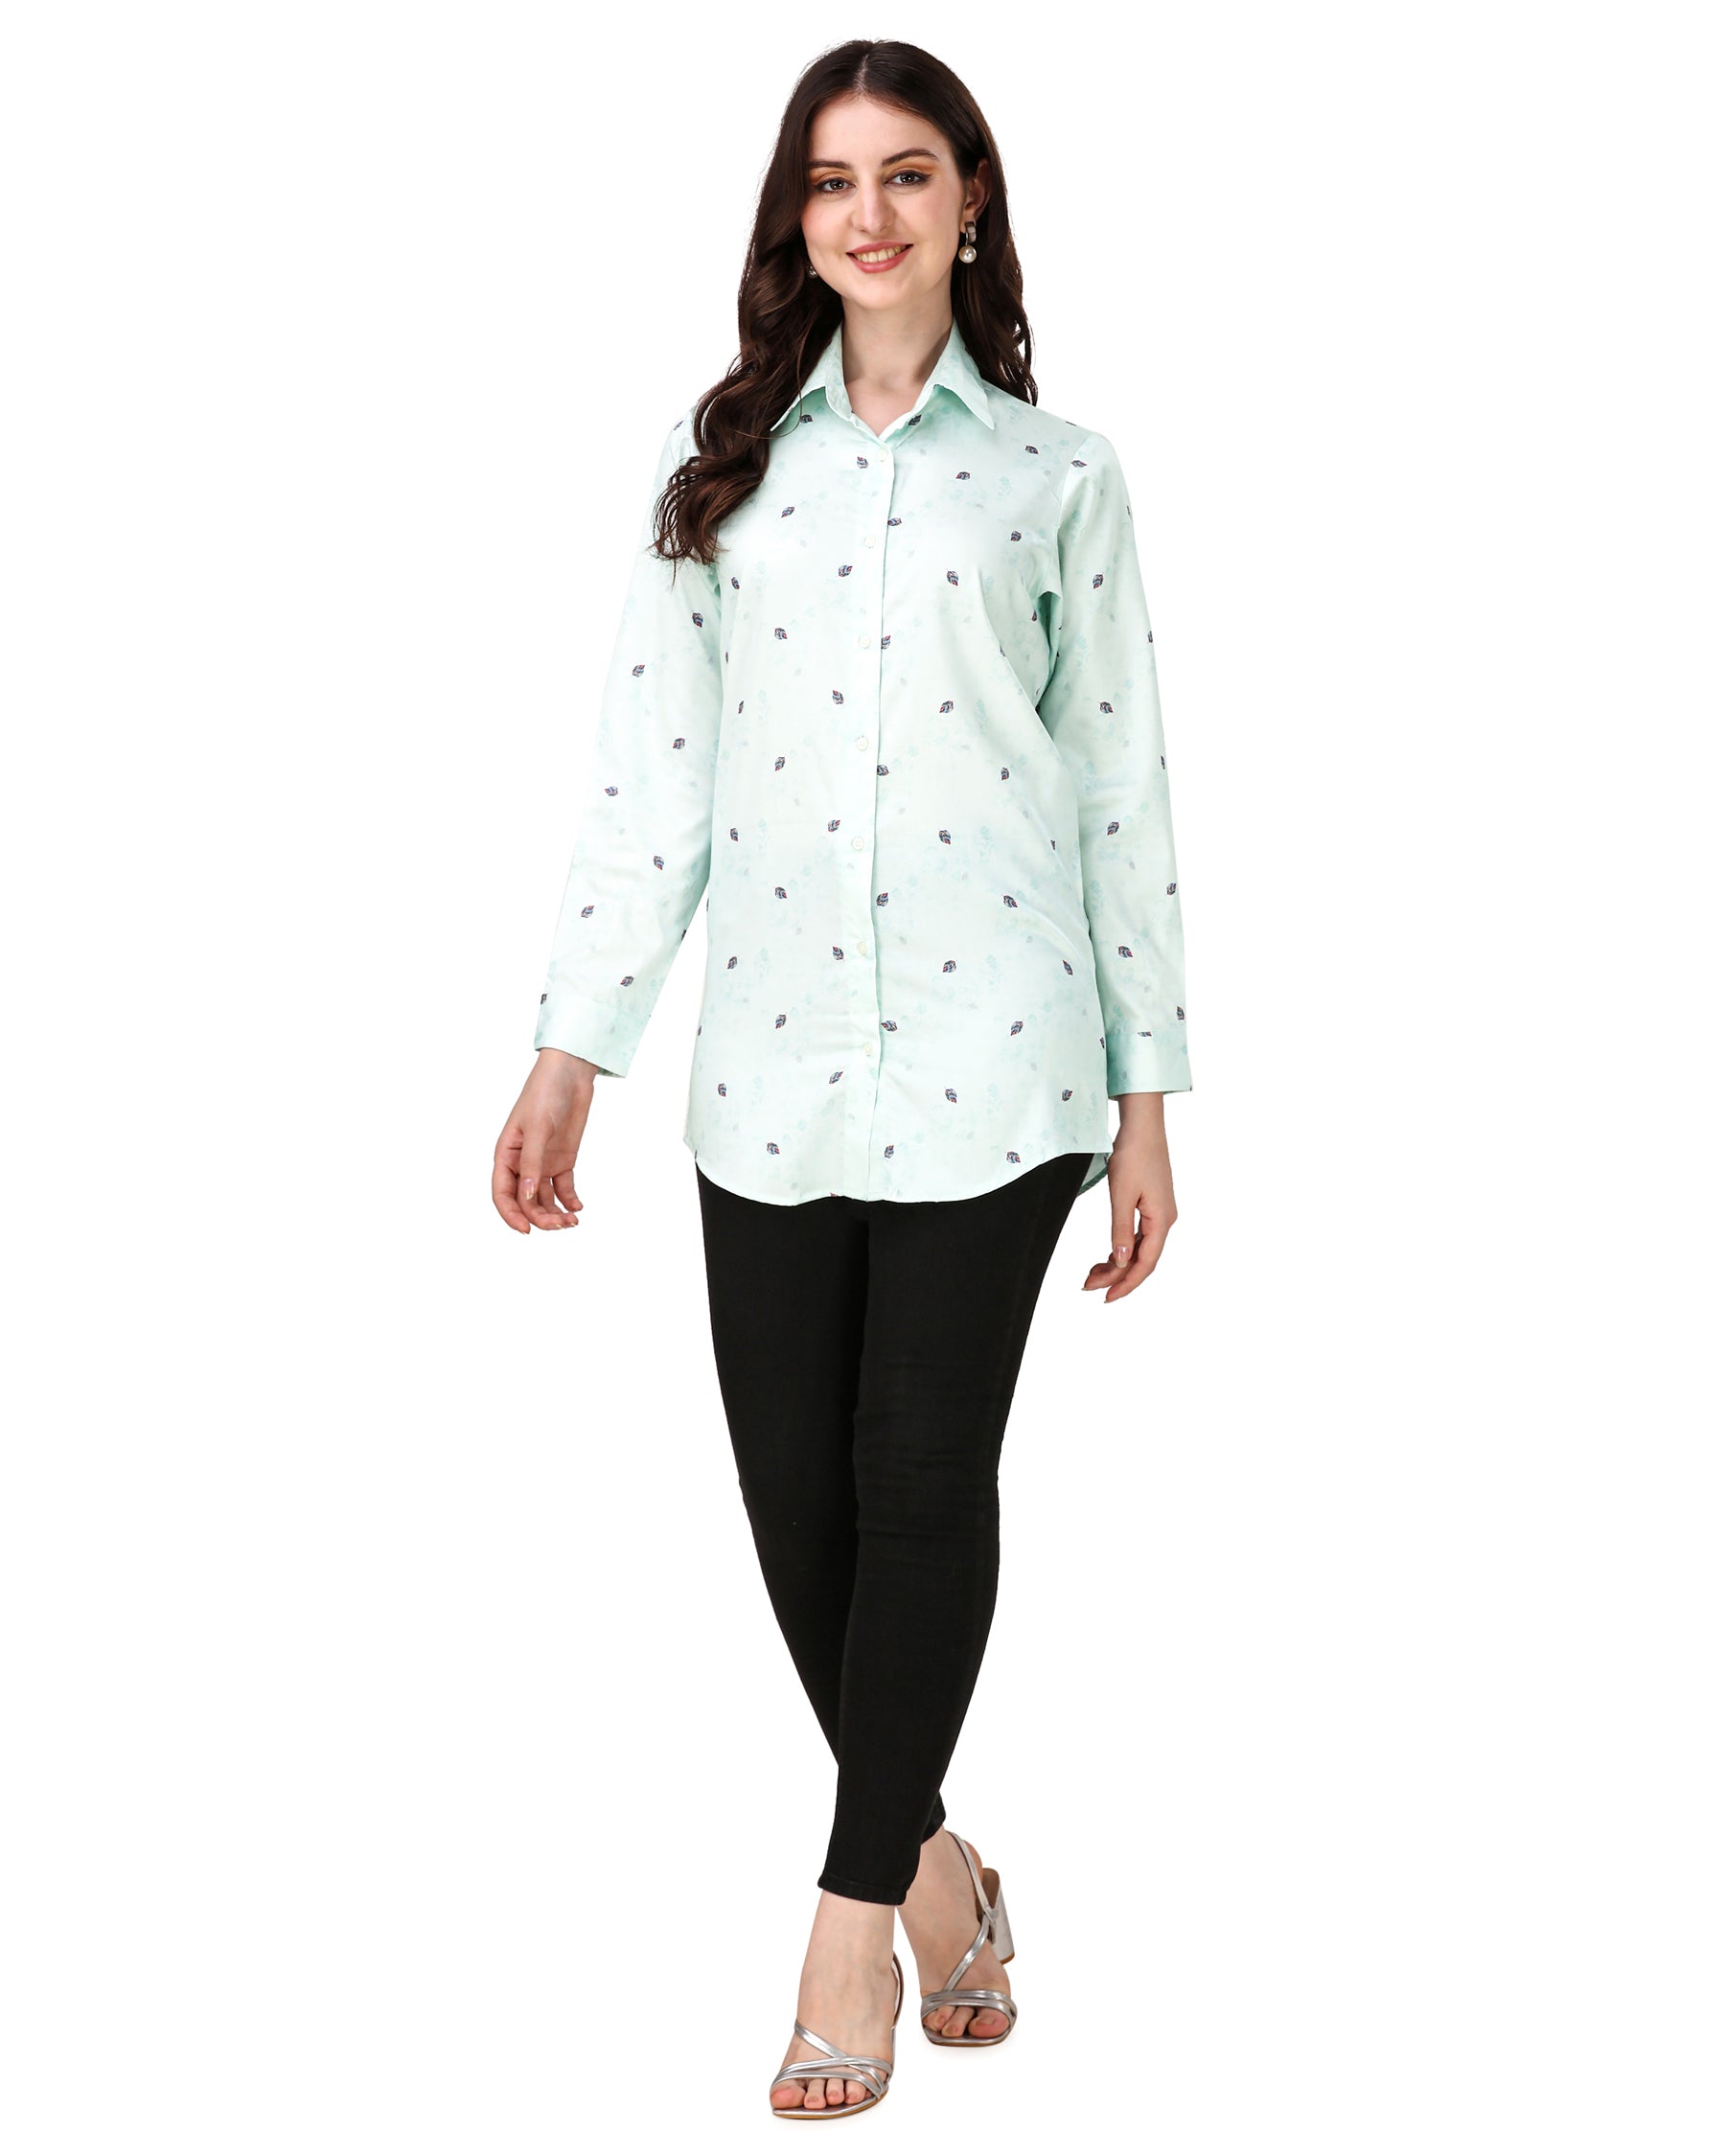 Periglacial Green with Feather Printed Super Soft Premium Cotton Women’s Shirt